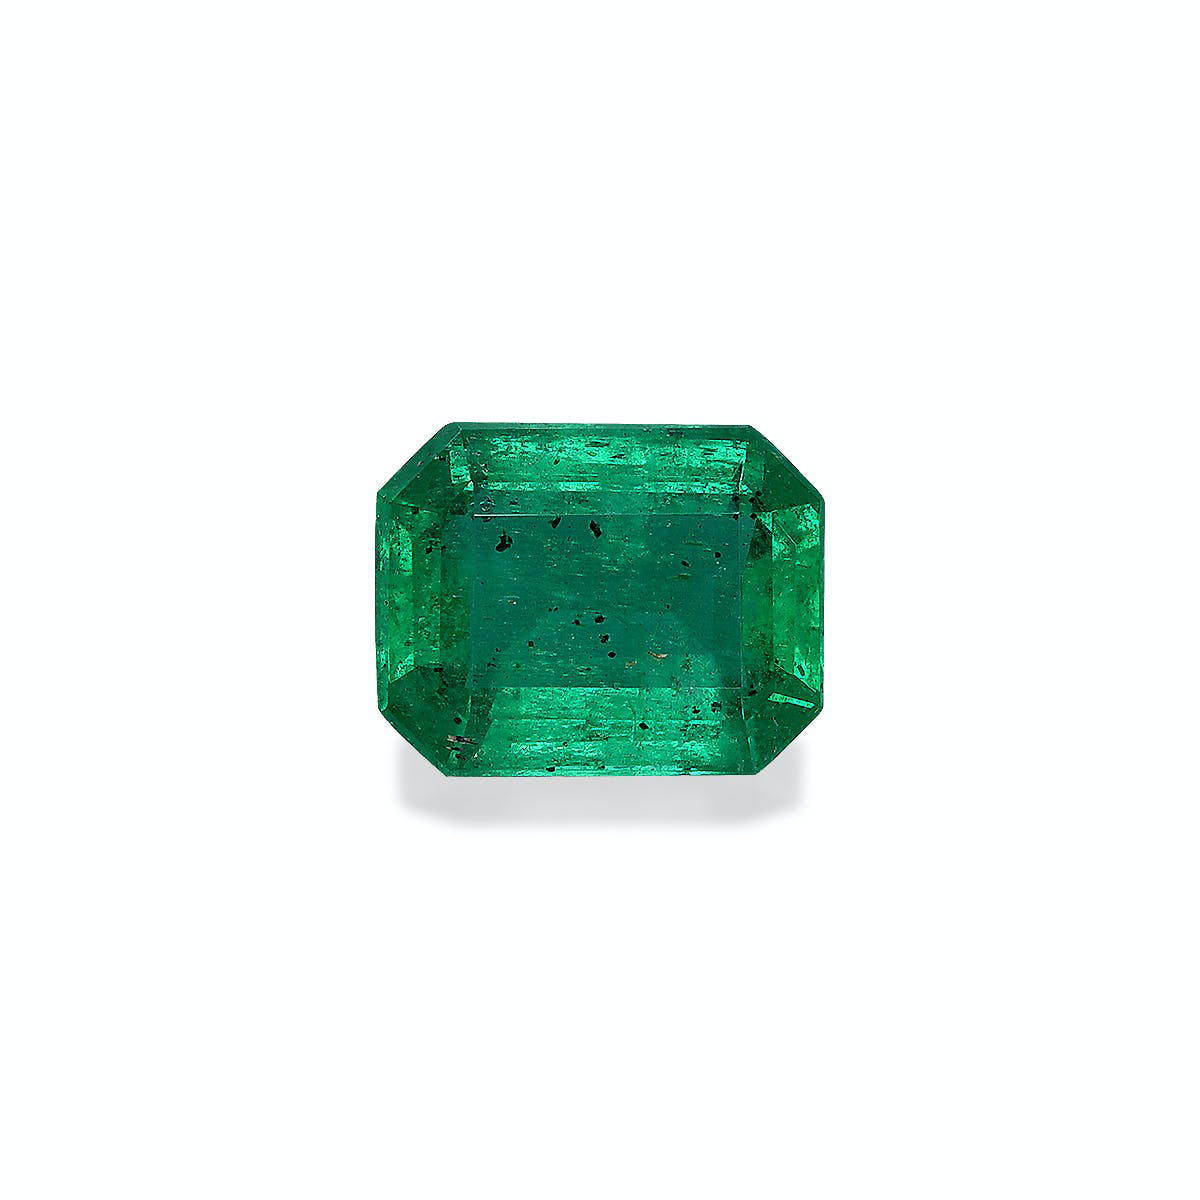 Picture of Green Zambian Emerald 1.64ct - 8x6mm (PG0338)